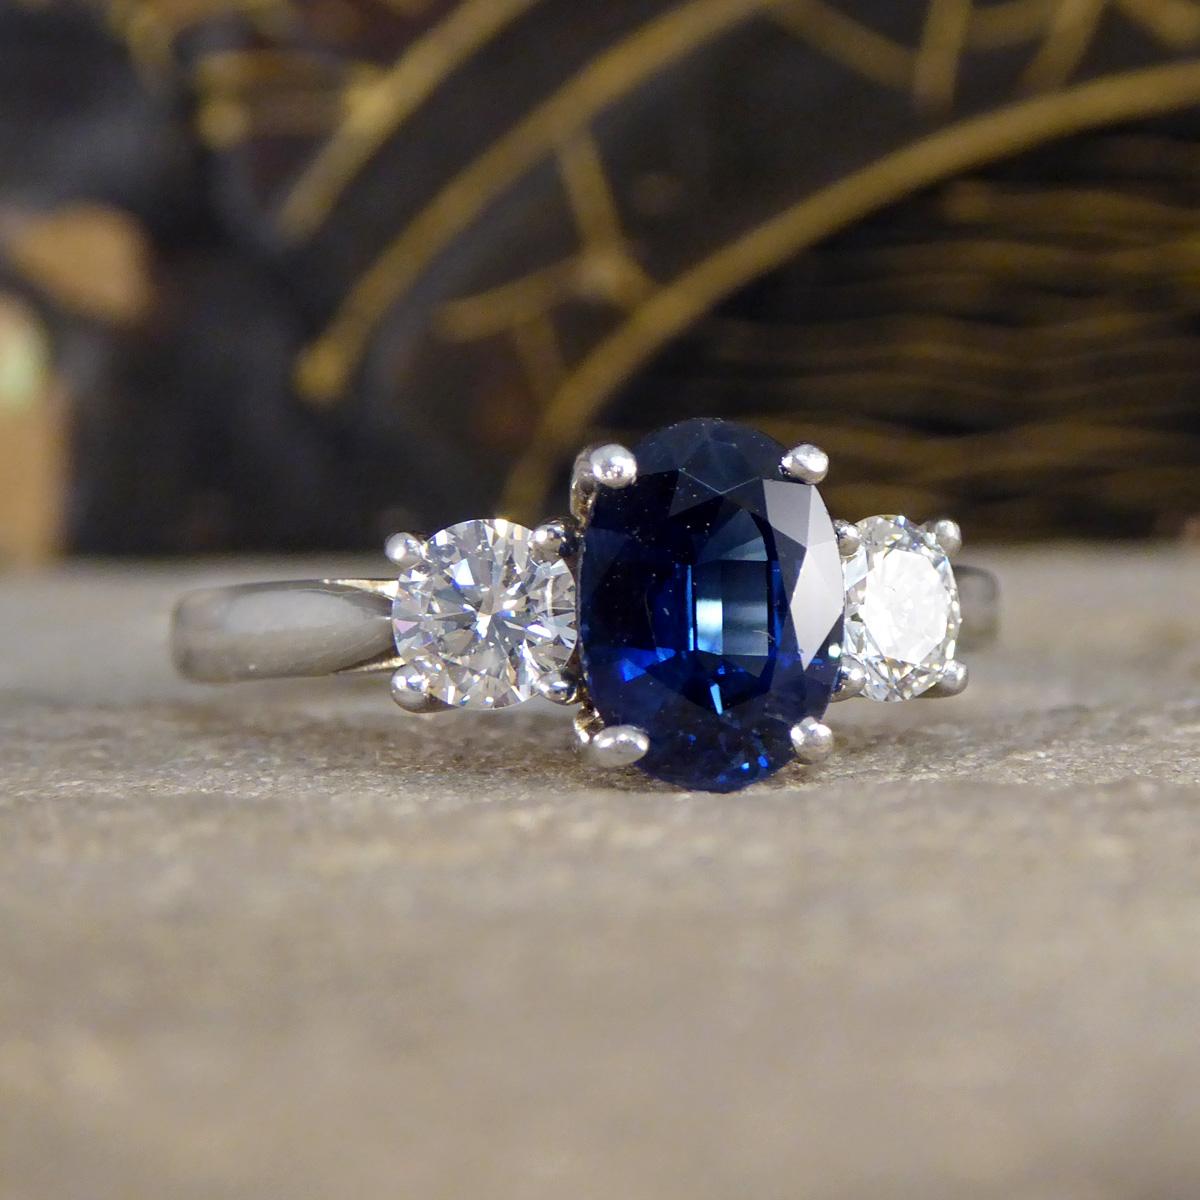 This modern Oval Cut Sapphire and Diamond three stone ring in Platinum showcases contemporary elegance and timeless sophistication. The centre piece of this exquisite design is a stunning 1.75ct oval cut sapphire, known for its deep, enchanting blue